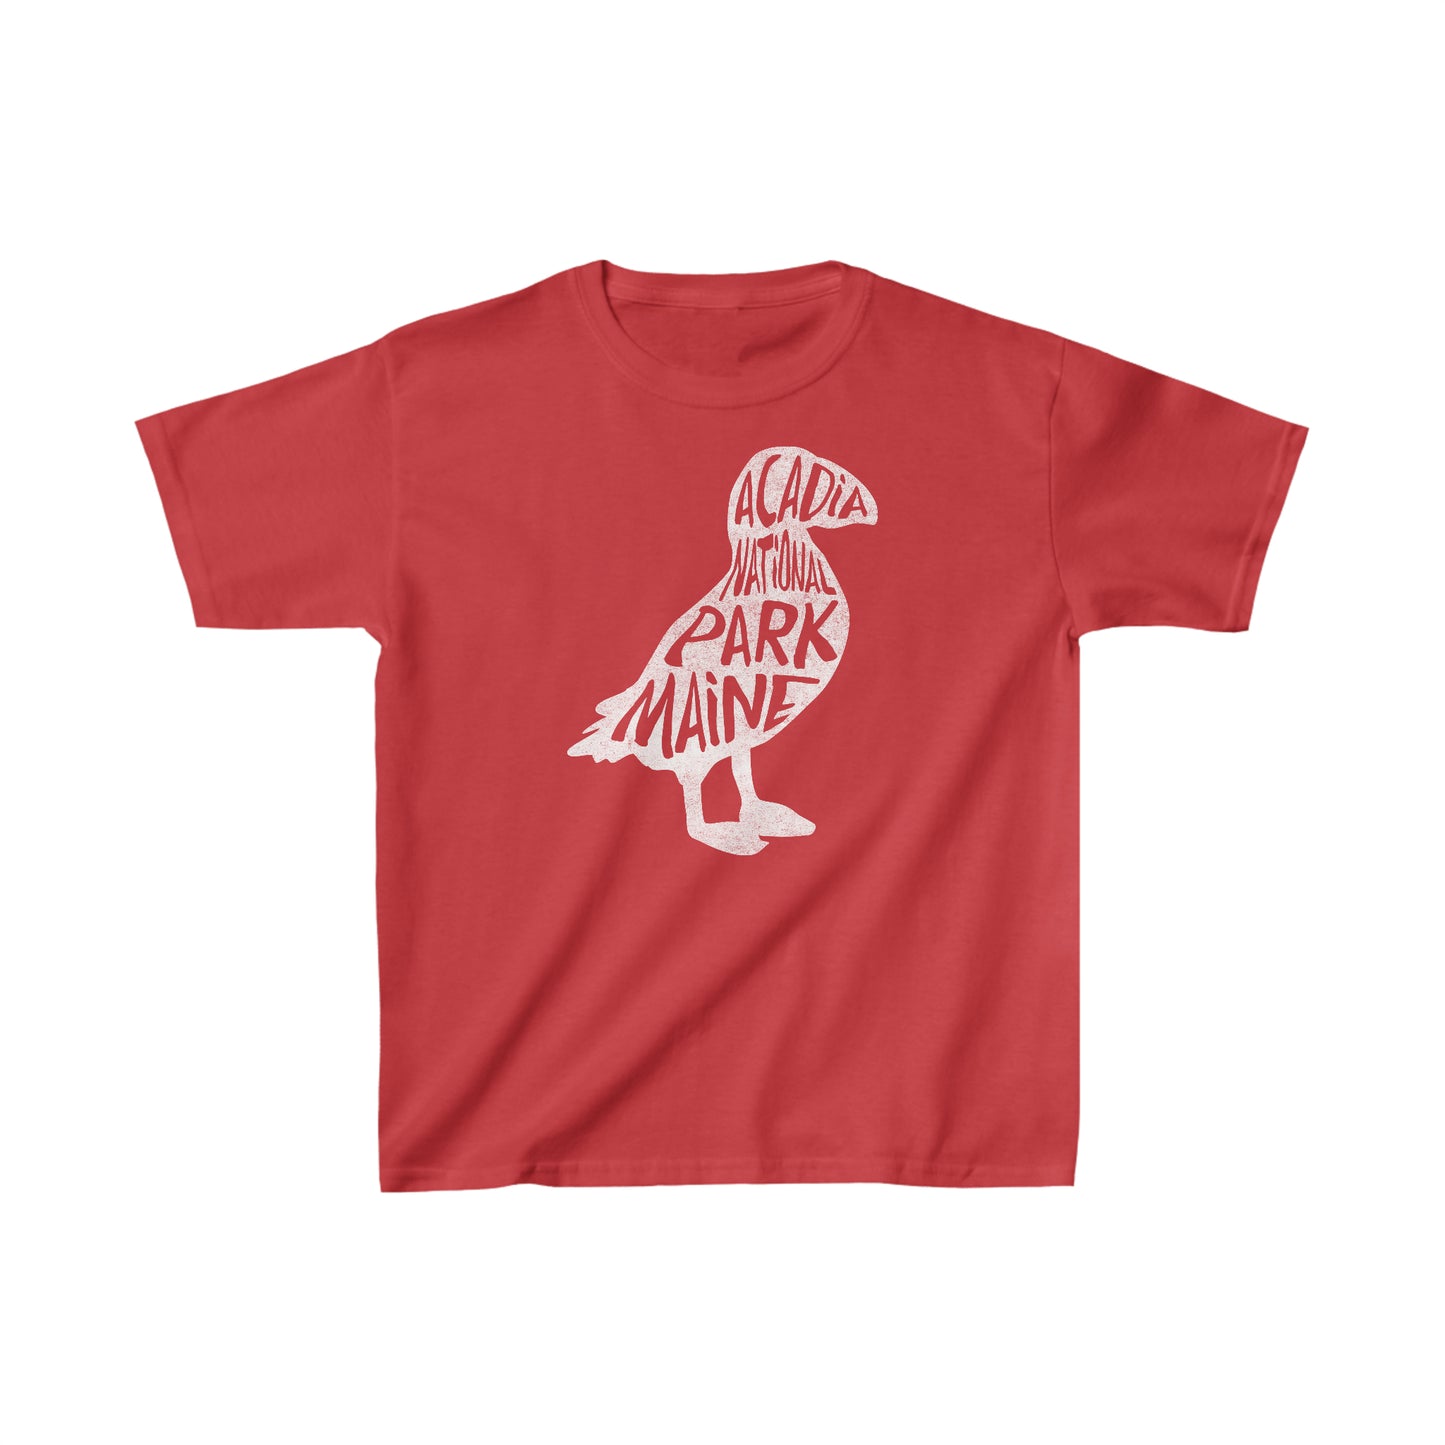 Acadia National Park Child T-Shirt - Puffin Chunky Text